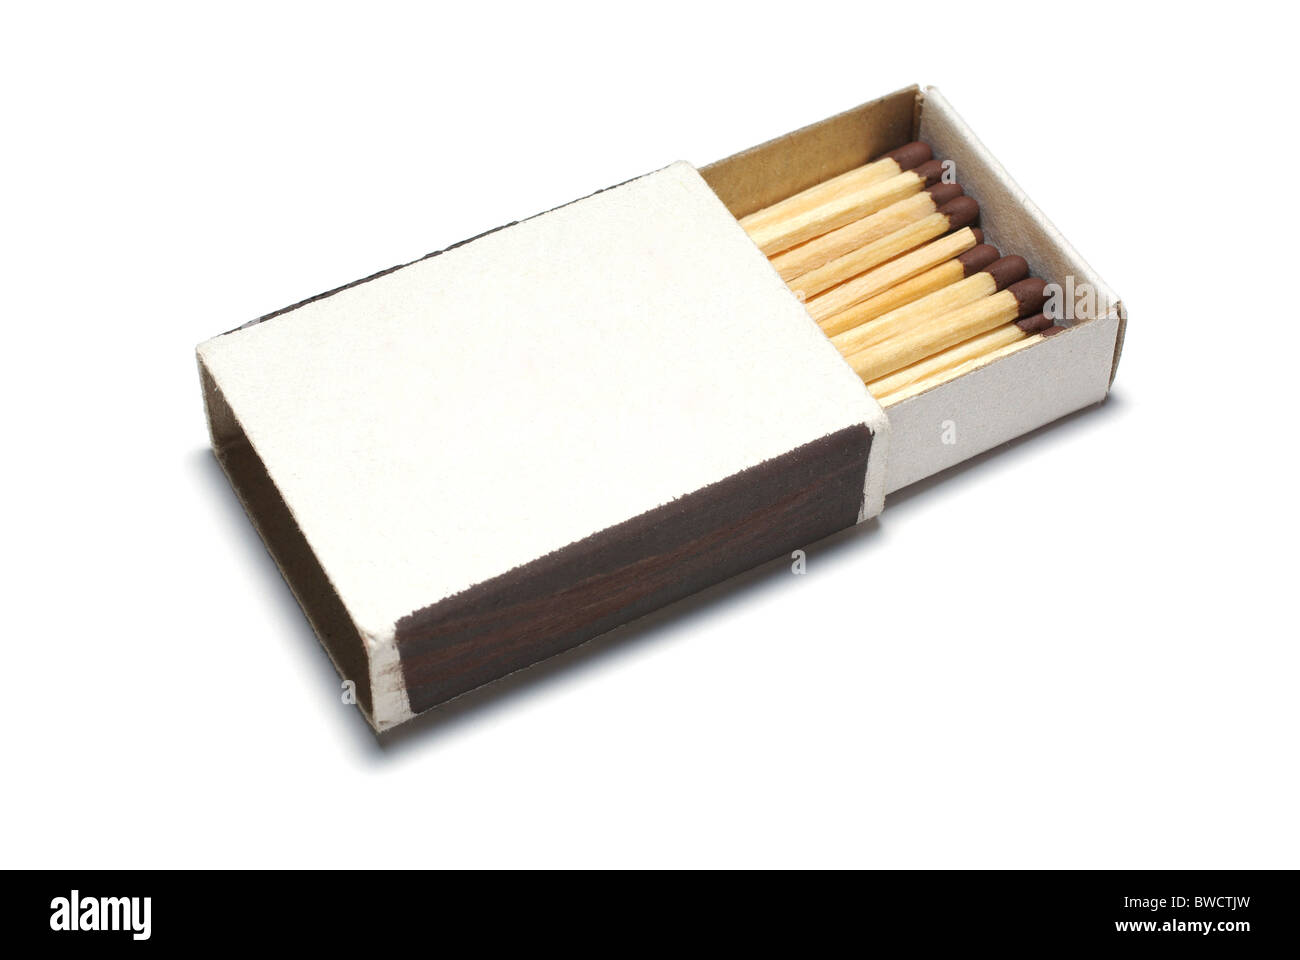 Matches in opened box isolated on white background. Stock Photo